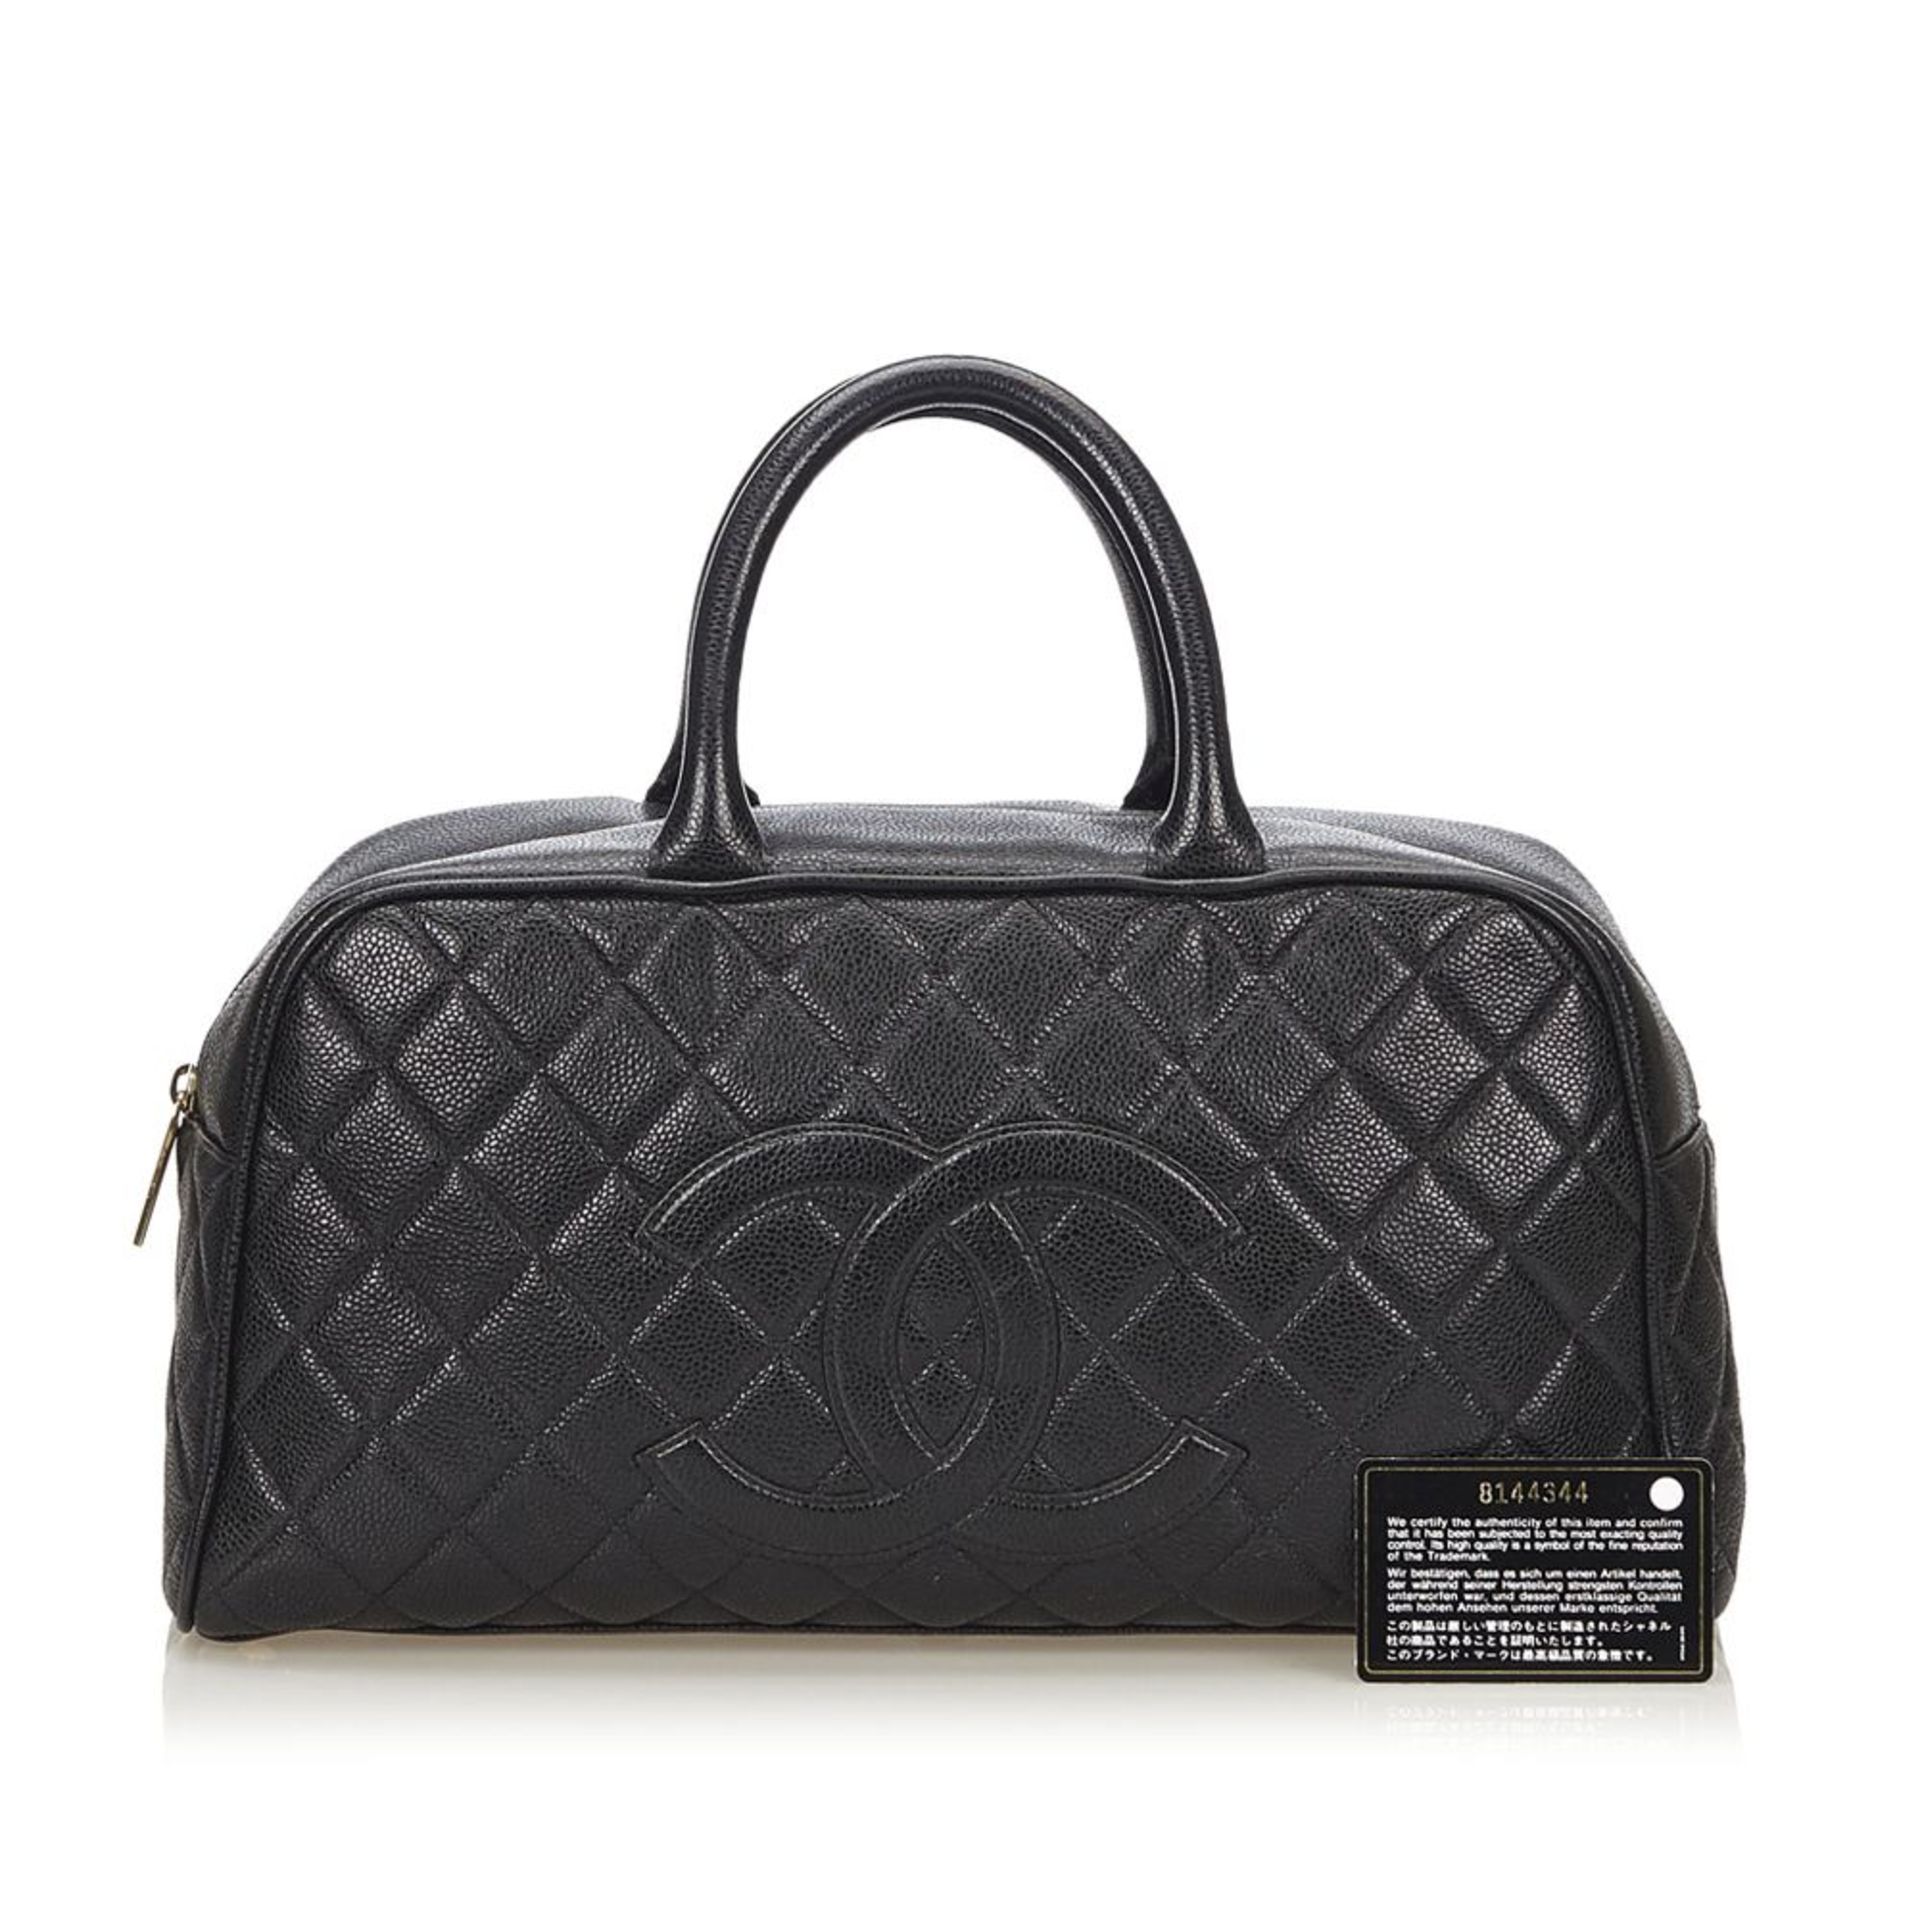 A Chanel caviar leather bowling handbag,this Boston bag features a quilted caviar leather body, with - Image 3 of 3